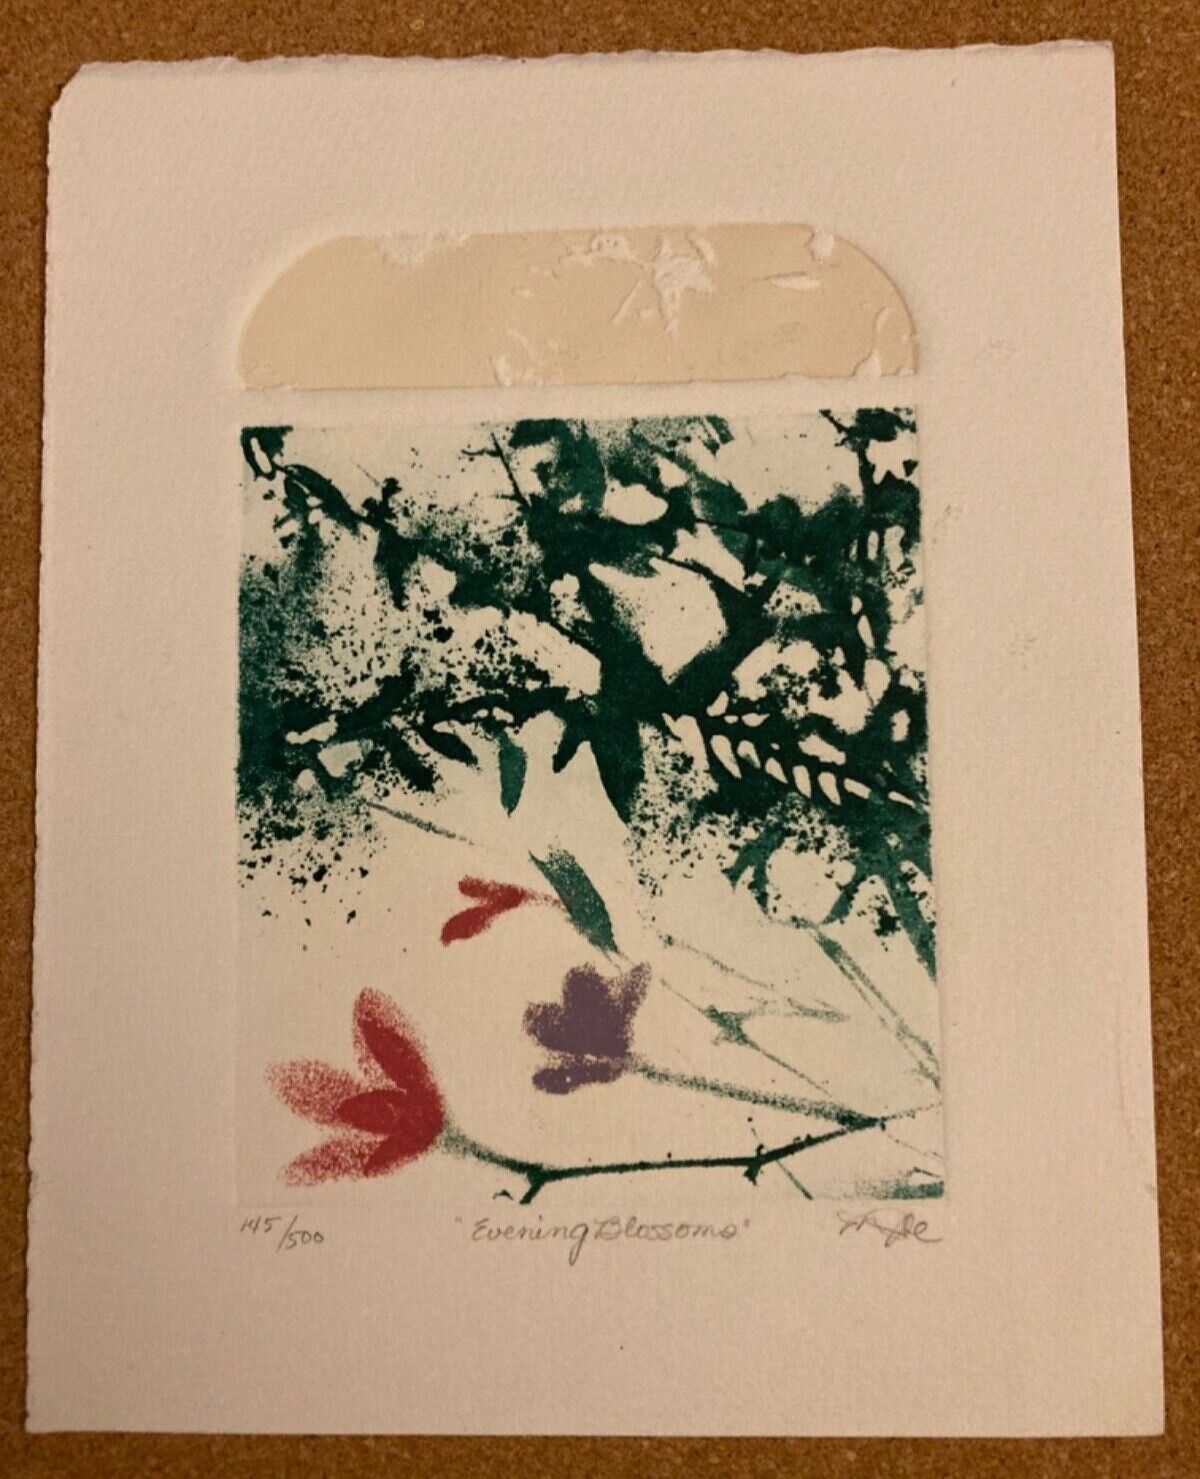 Signed and Numbered Limited Edition Woodblock Print Evening Blossoms 